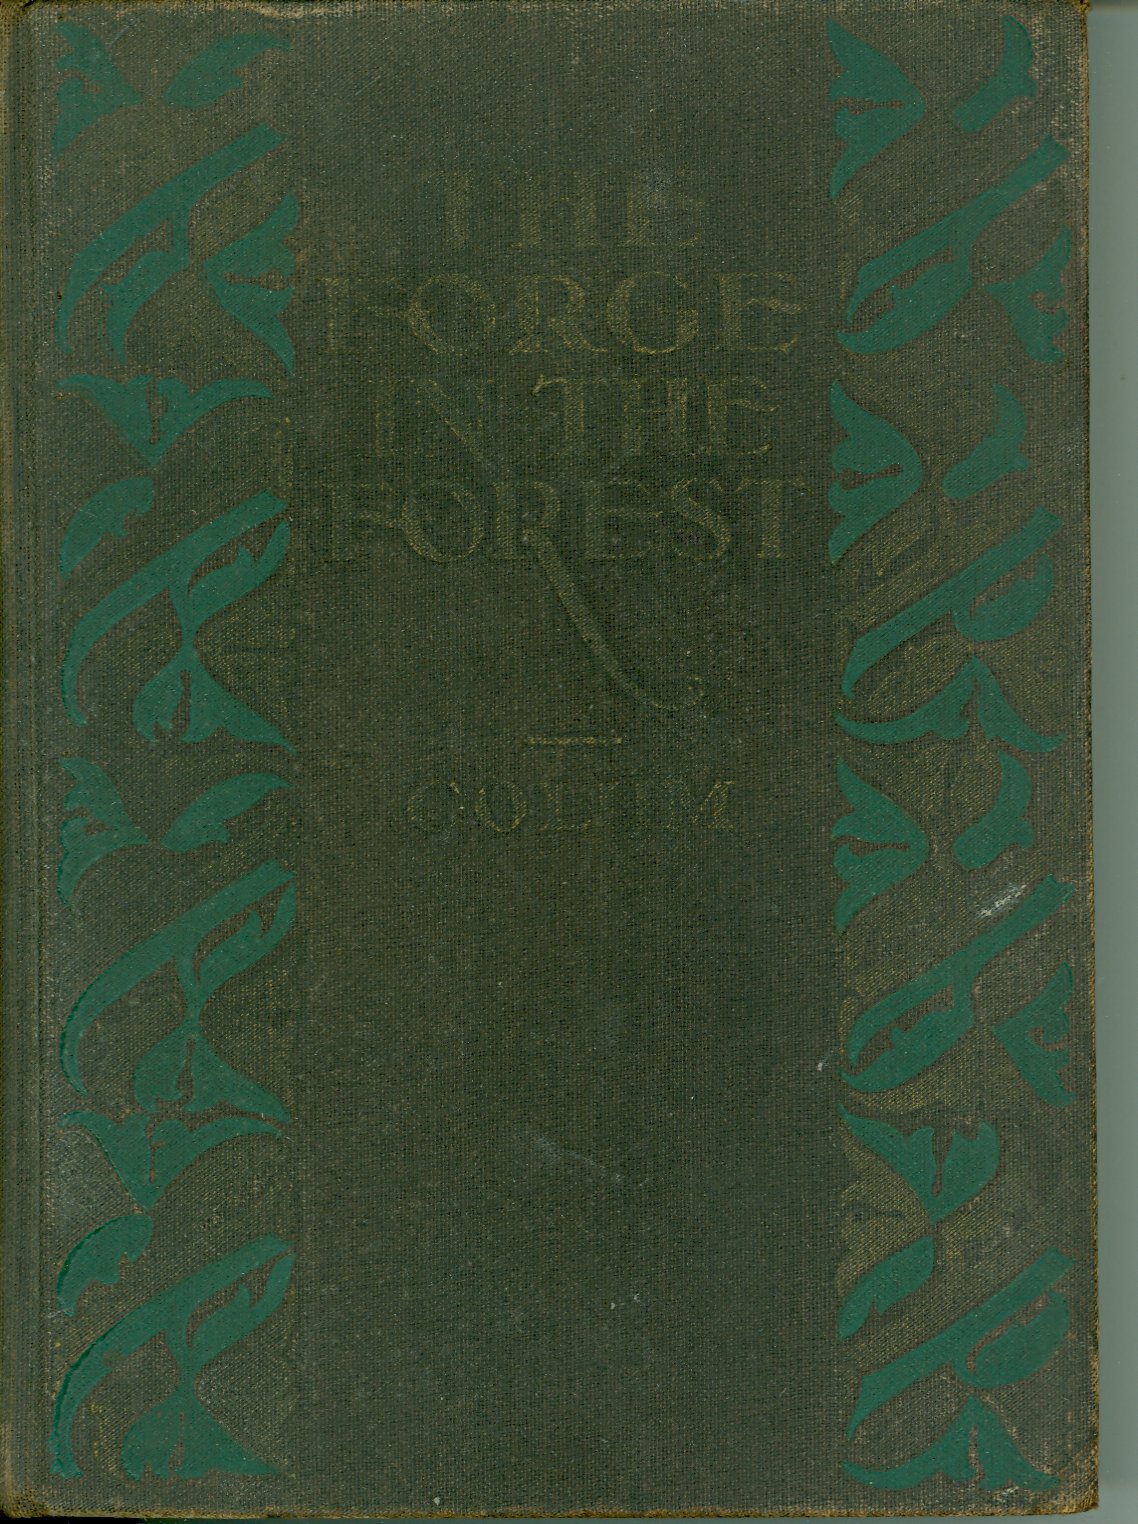 Front cover of book-1